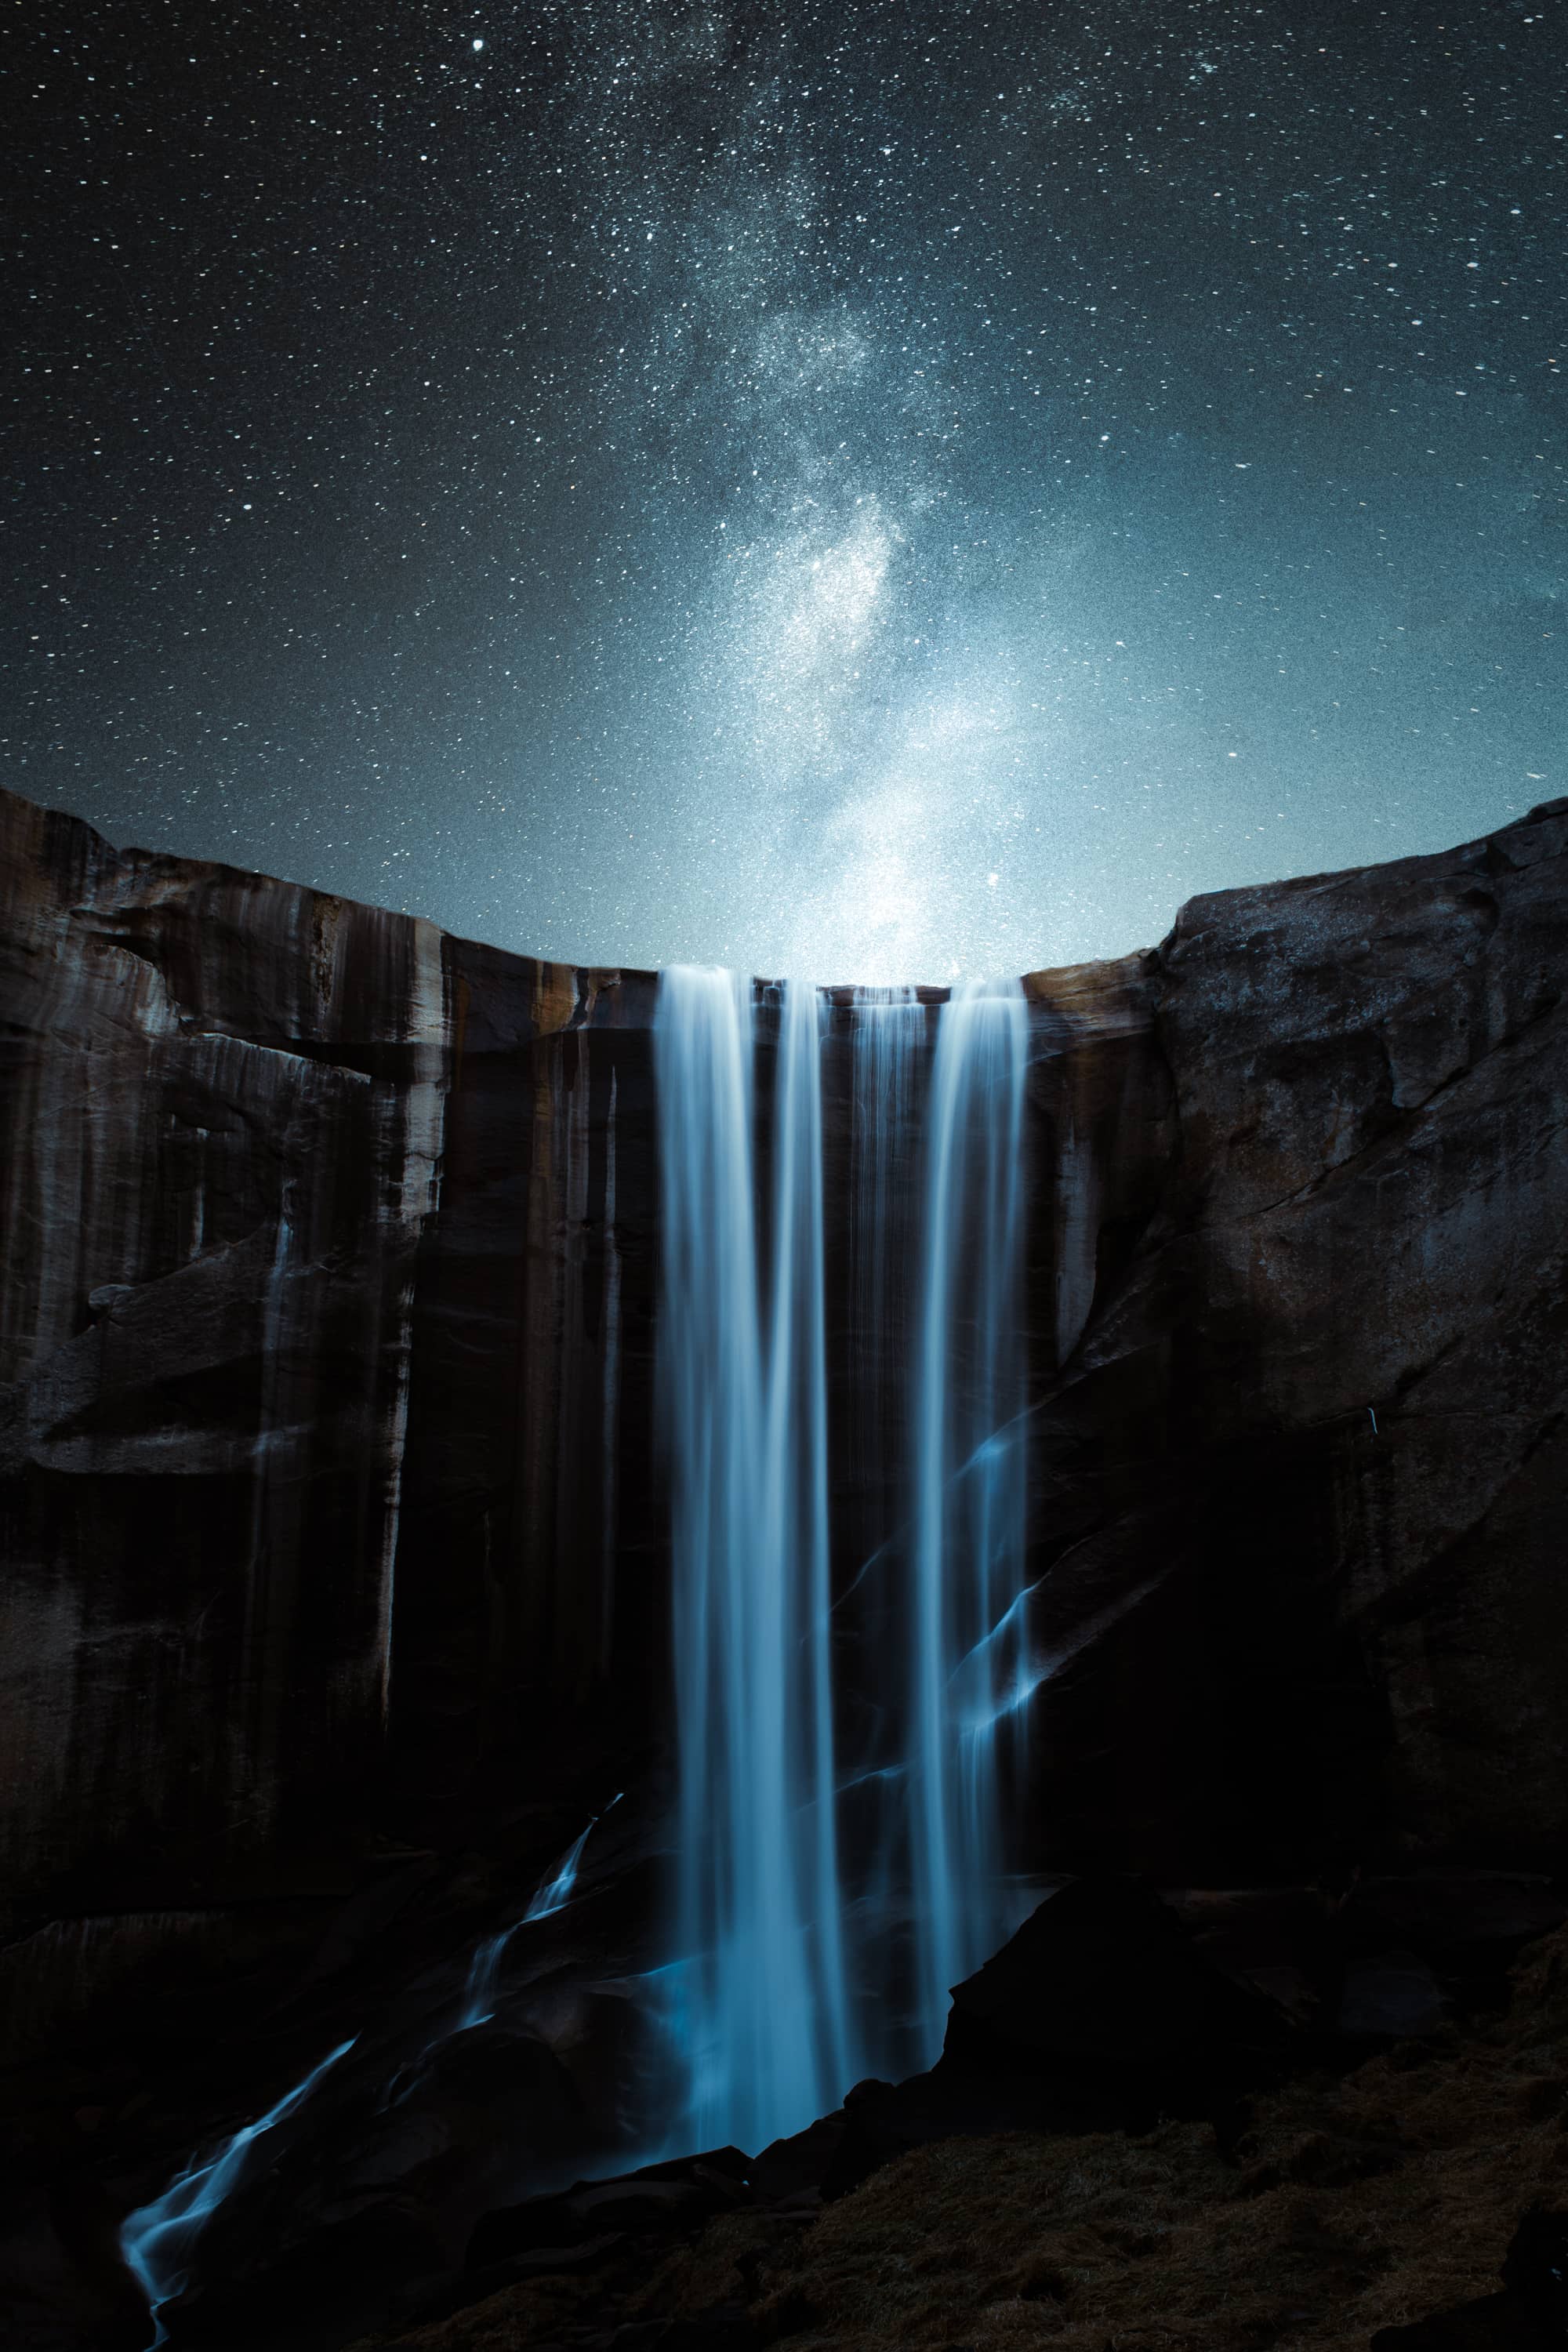 Waterfall With a Starry Night Sky by Jordan Mcgarth